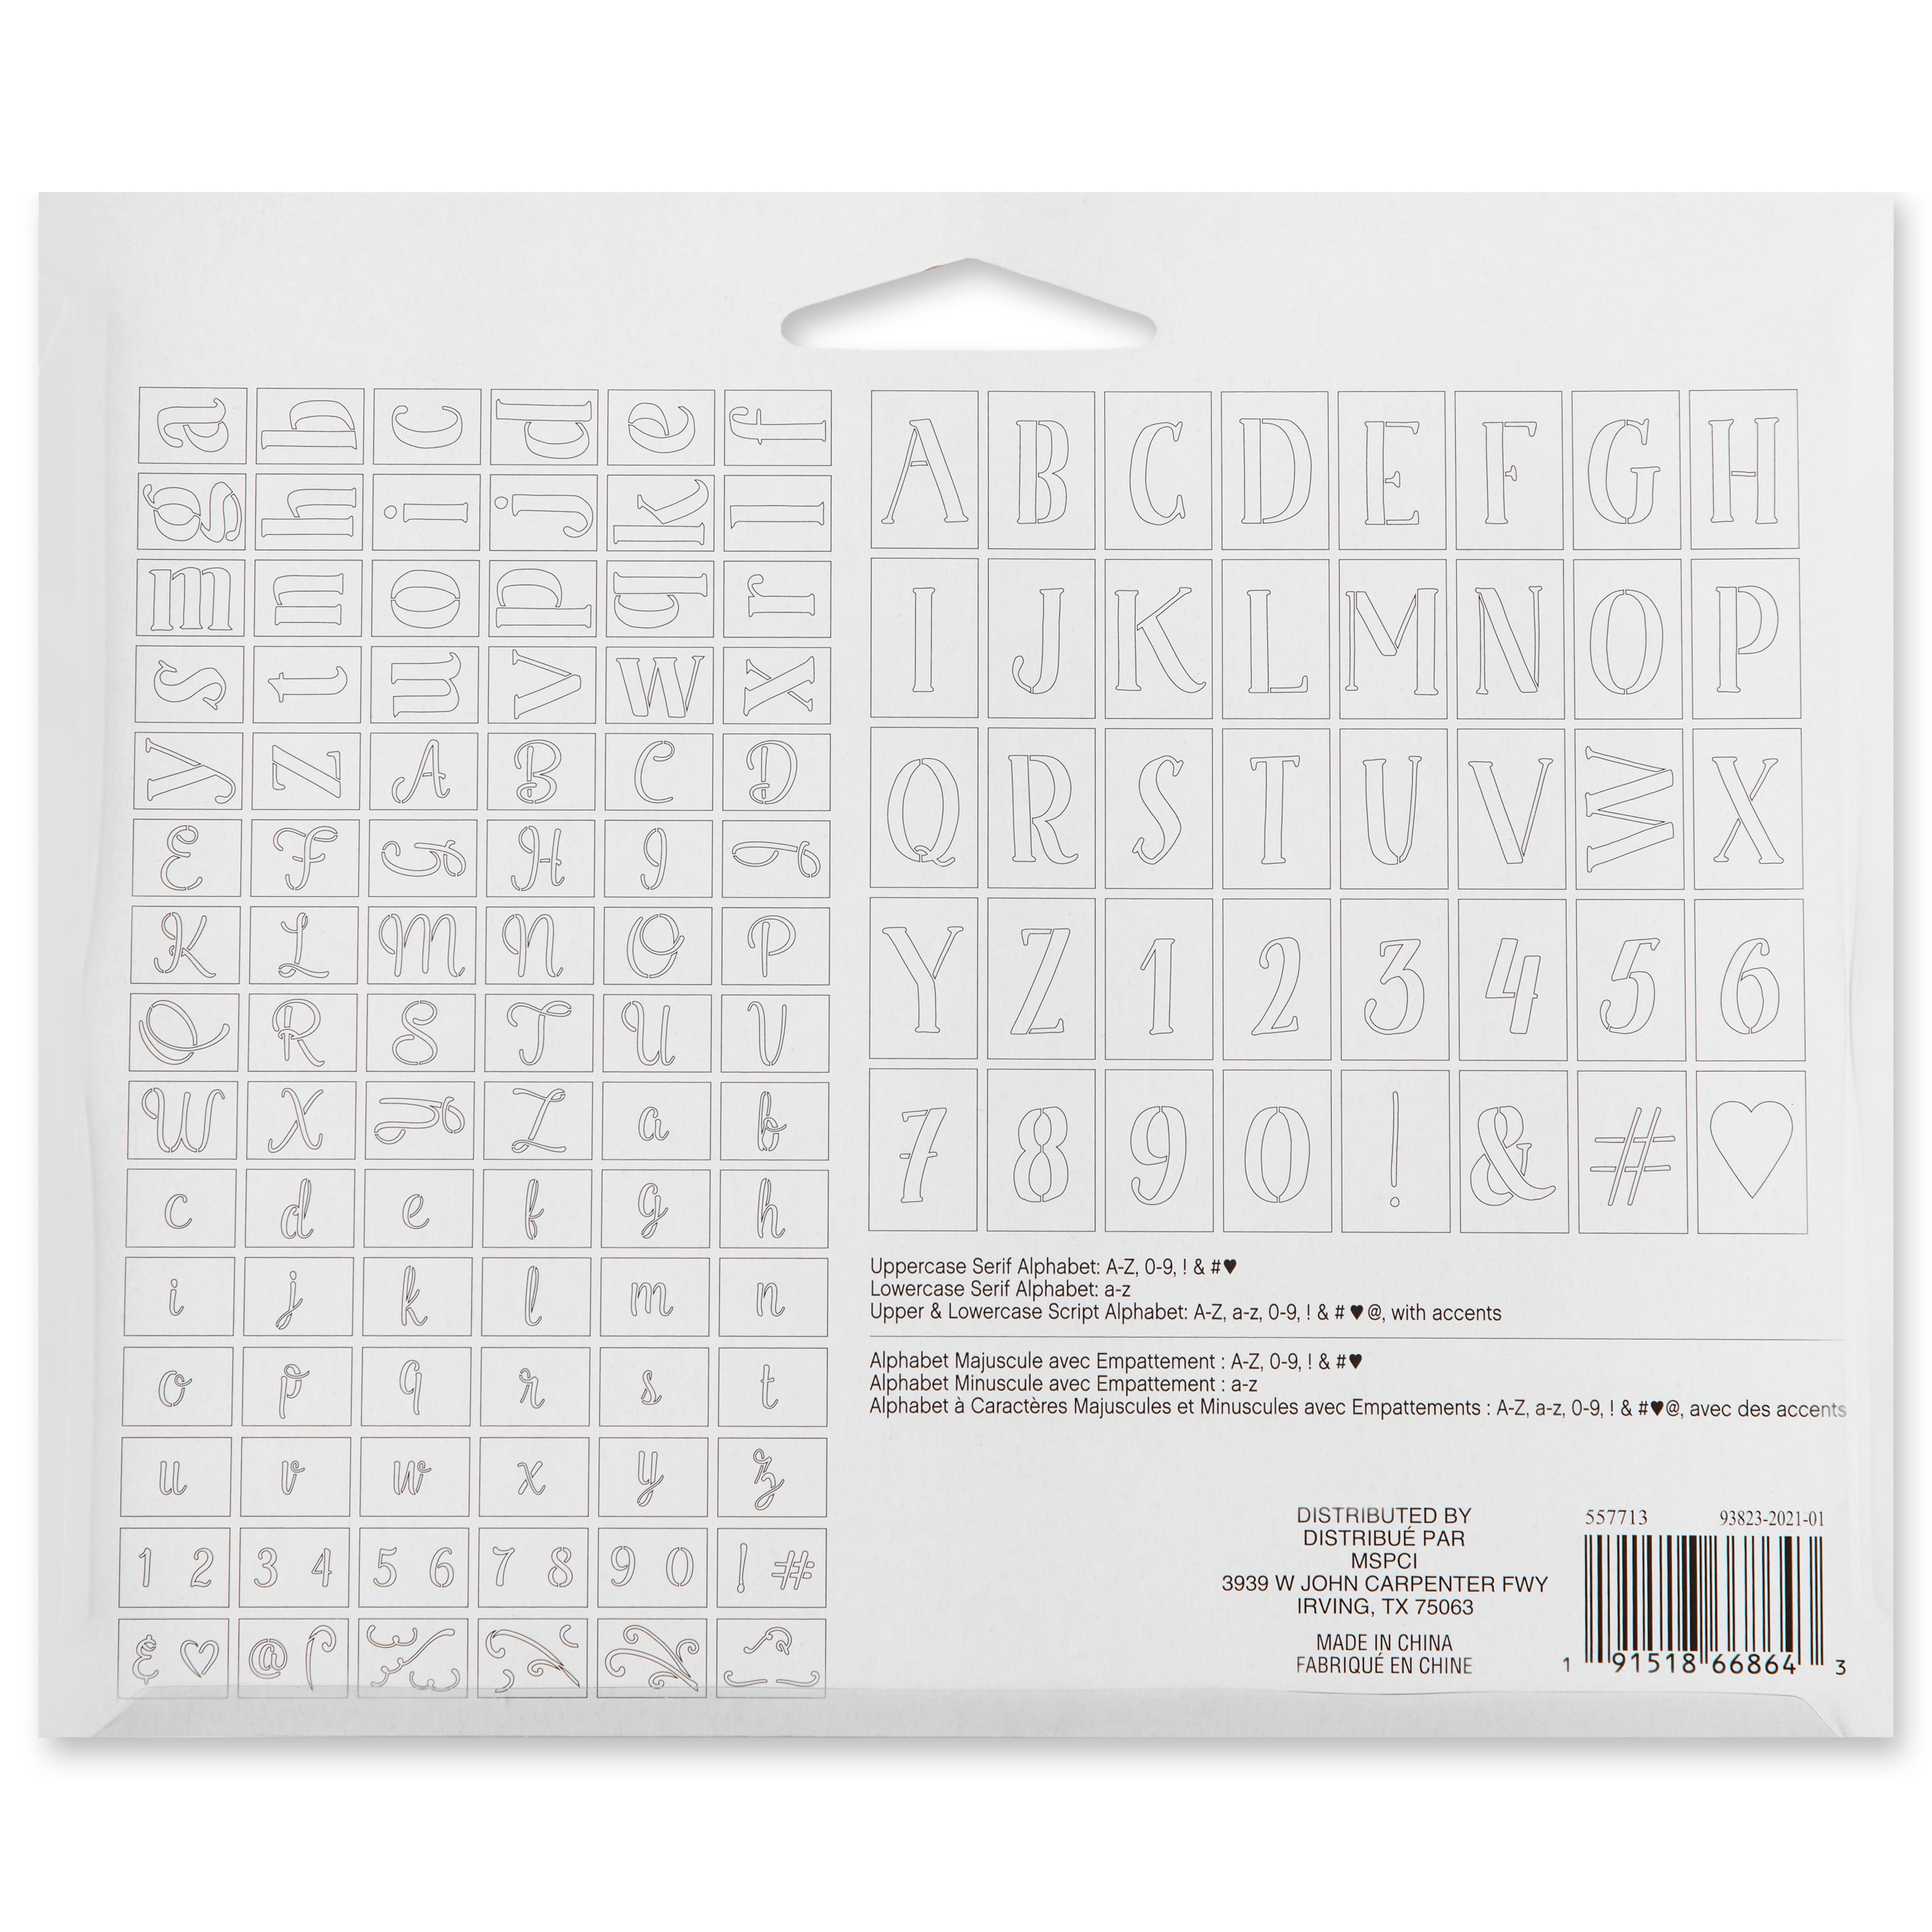 Shop for the Stencil Value Pack by Artist's Loft™ at Michaels